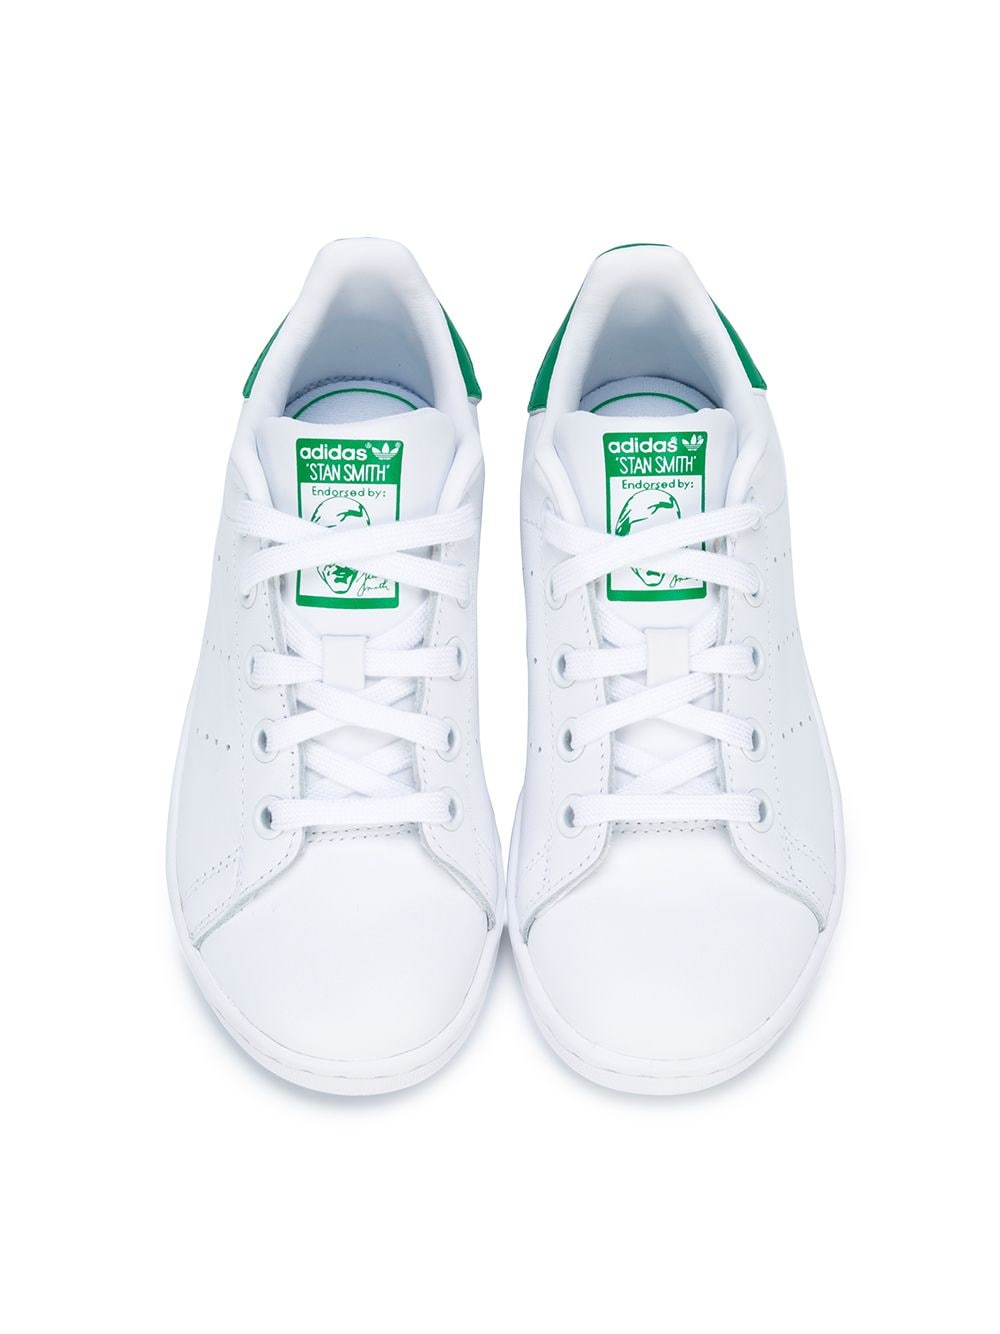 Adidas Superstar / Stan Smith / Advantage / Baseline Youth Kids Shoes  Sneaker